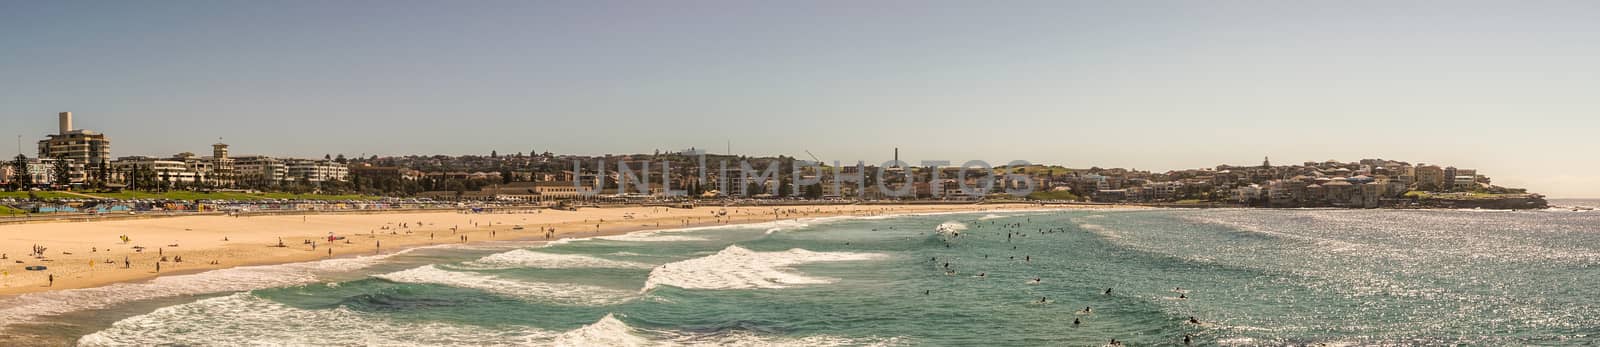 Sydney, Australia - February 11, 2019:  Panorama shot of sandy Bondi beach part and its north shore with housing and nature reserves. Blue water and sky.